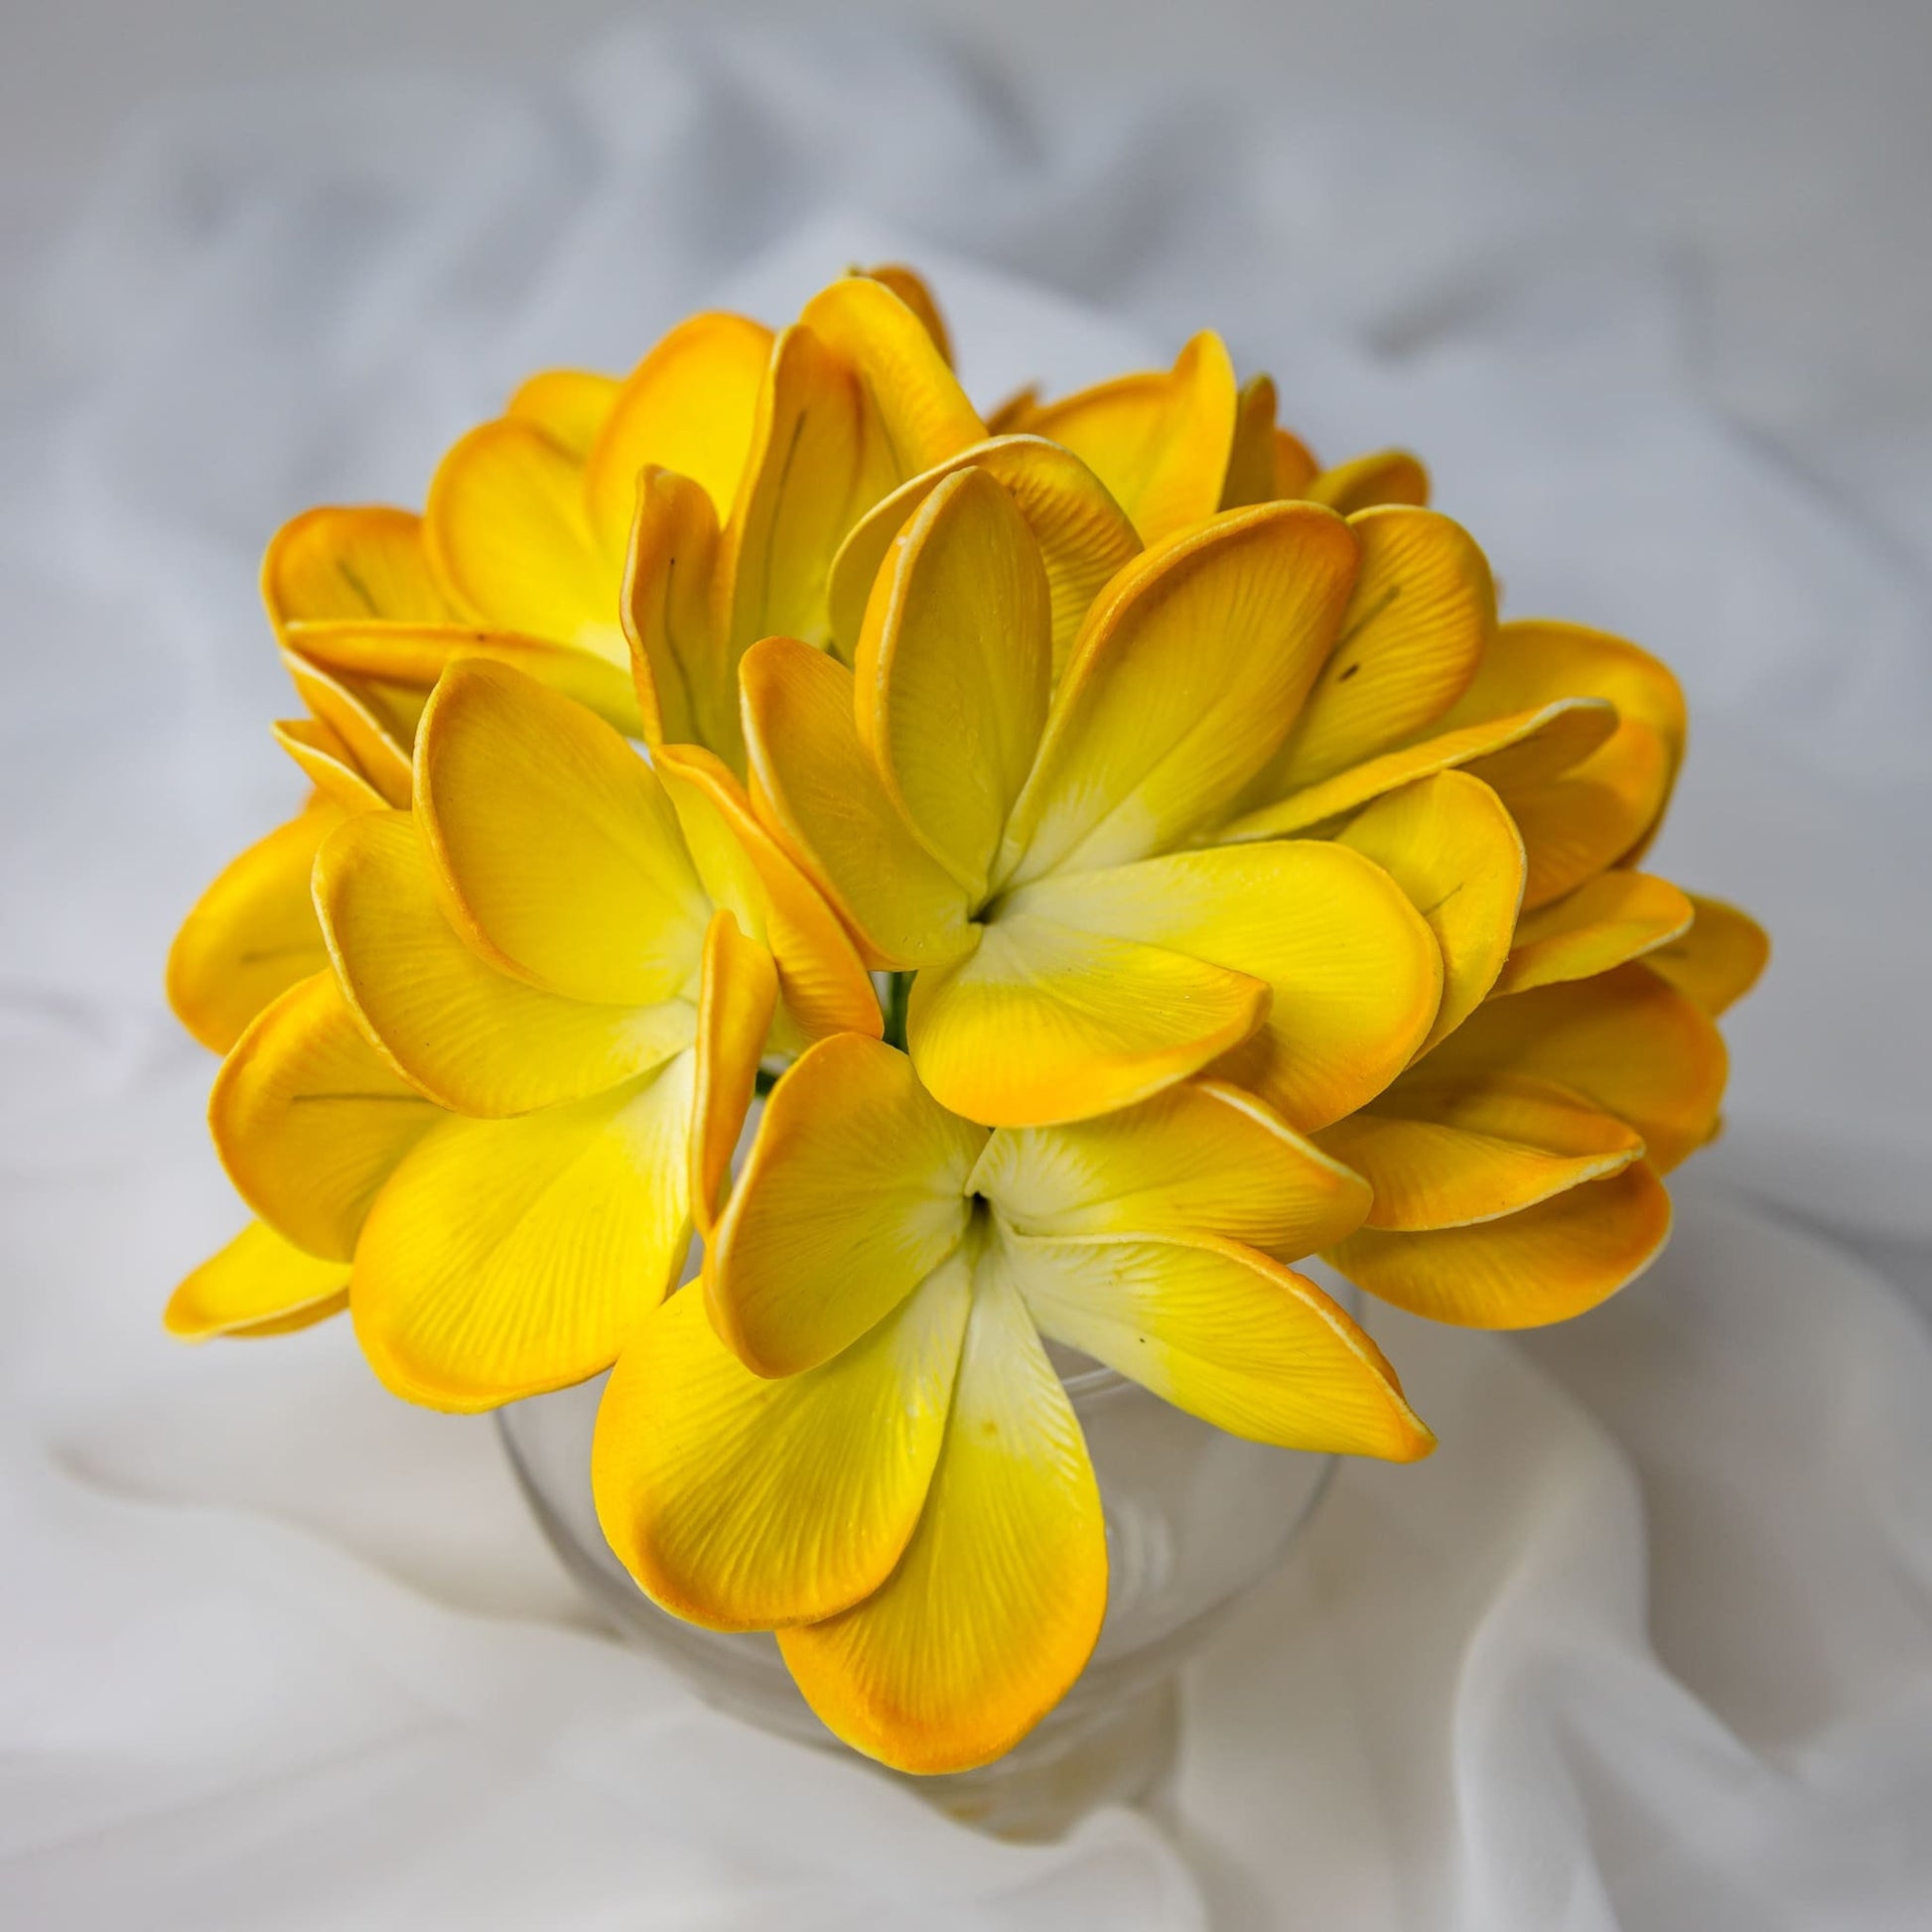 artificial tahitian gold frangipani flowers placed in transparent glass vase